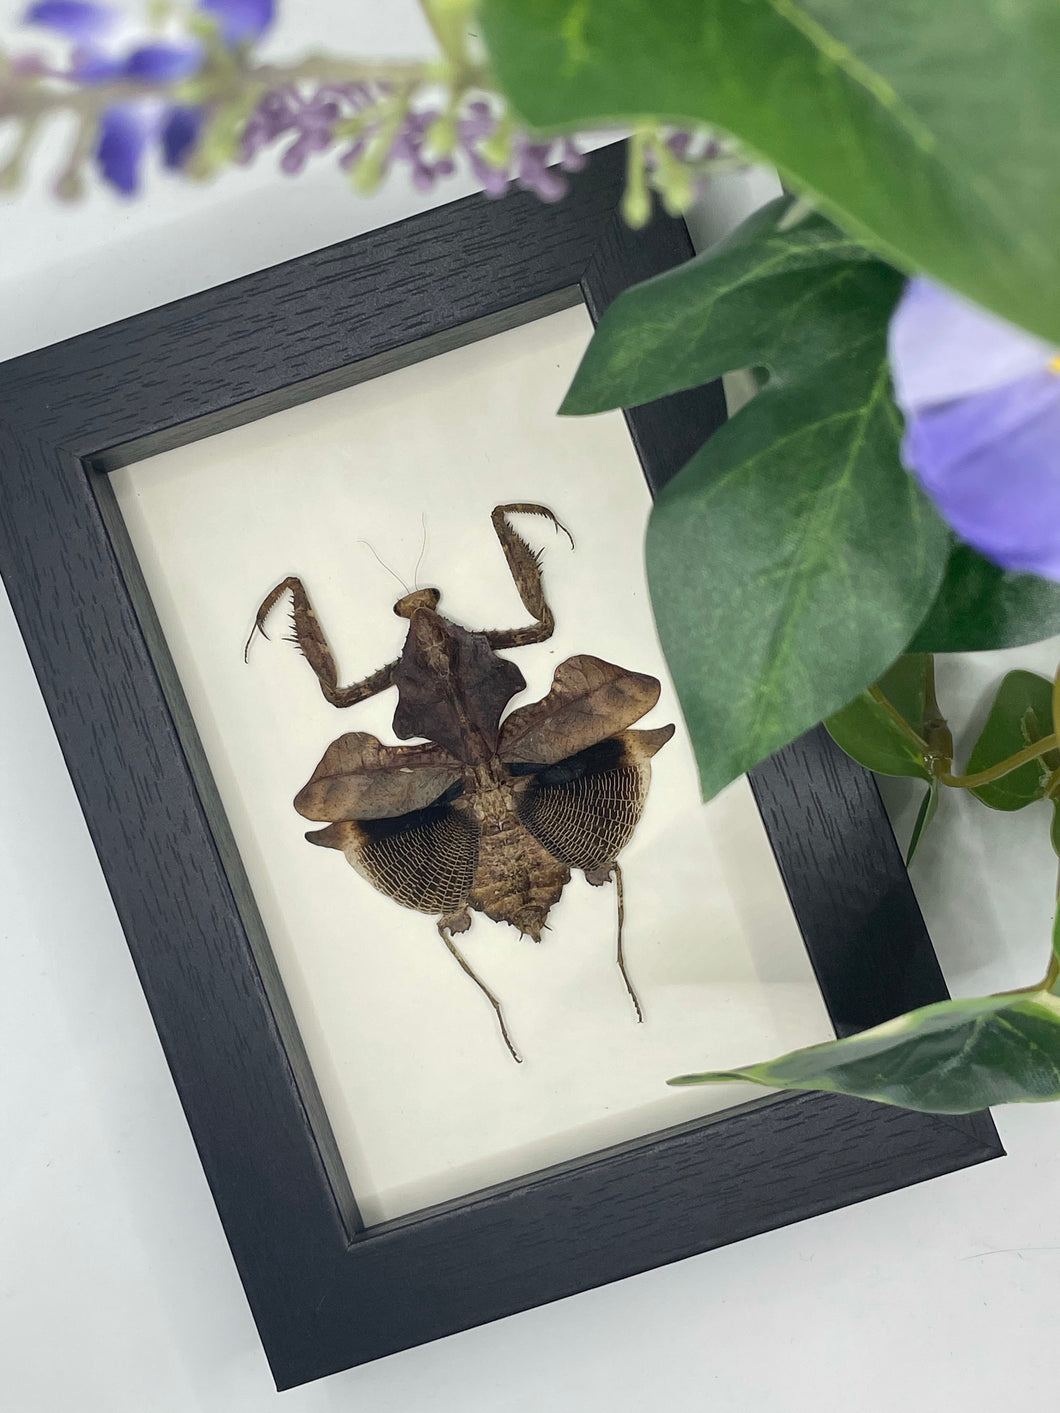 Dead Leaf Insect / Deroplatys Lobata in a frame